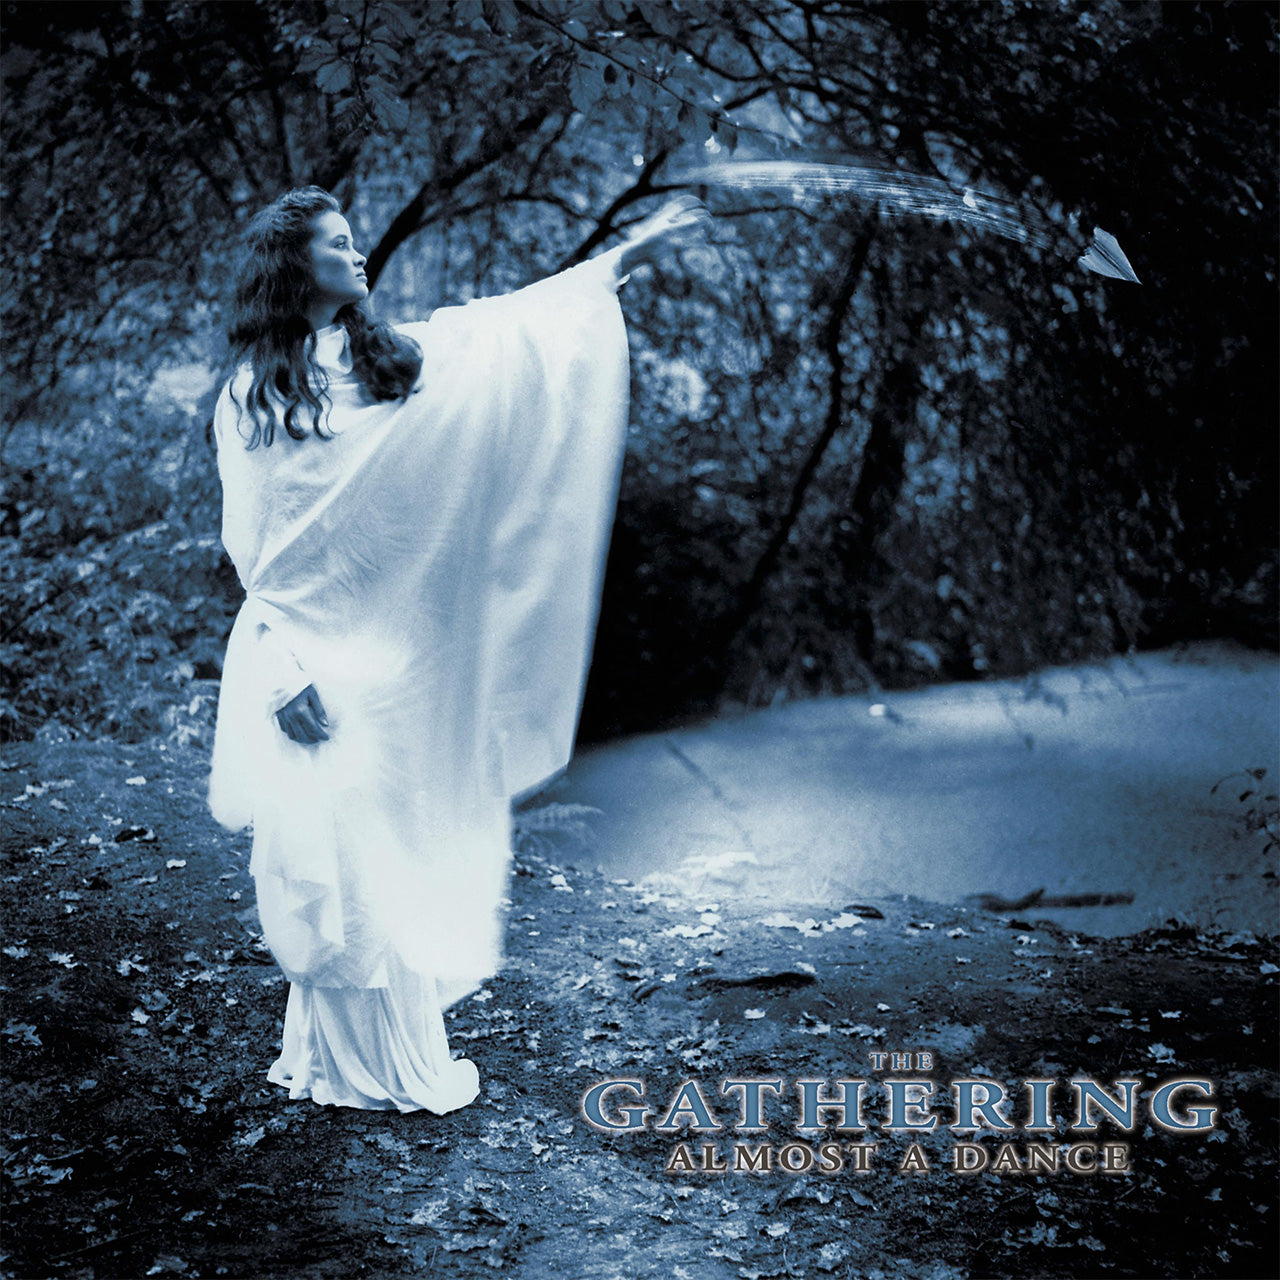 The Gathering - Almost a Dance (2019 Reissue) (CD)